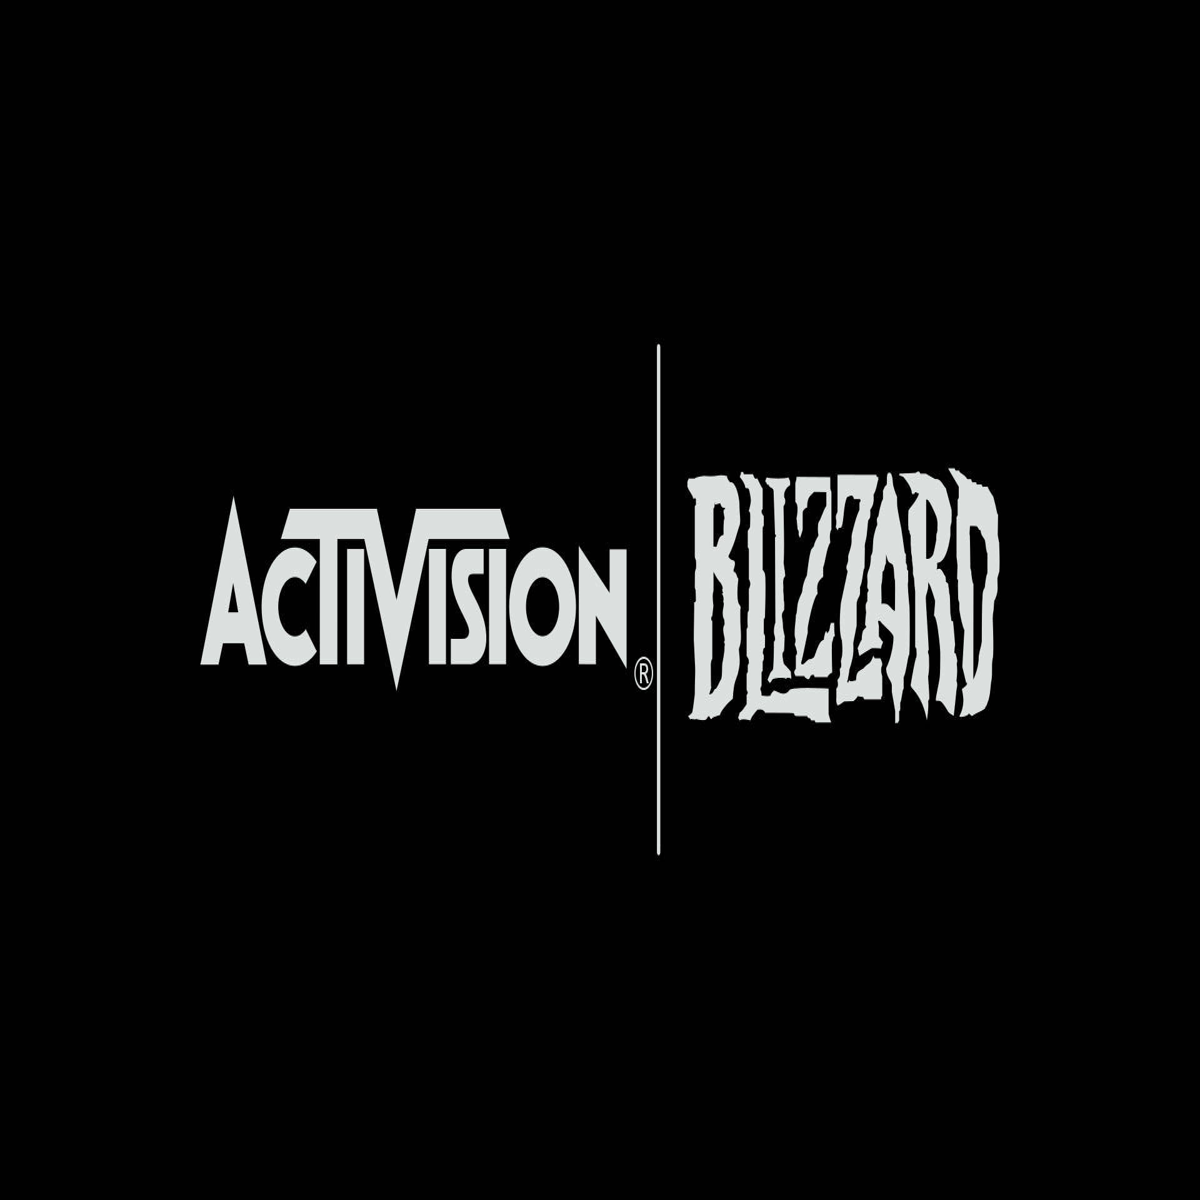 Microsoft's Activision Blizzard Acquisition Approved by Brazilian Regulator  - Sudairy